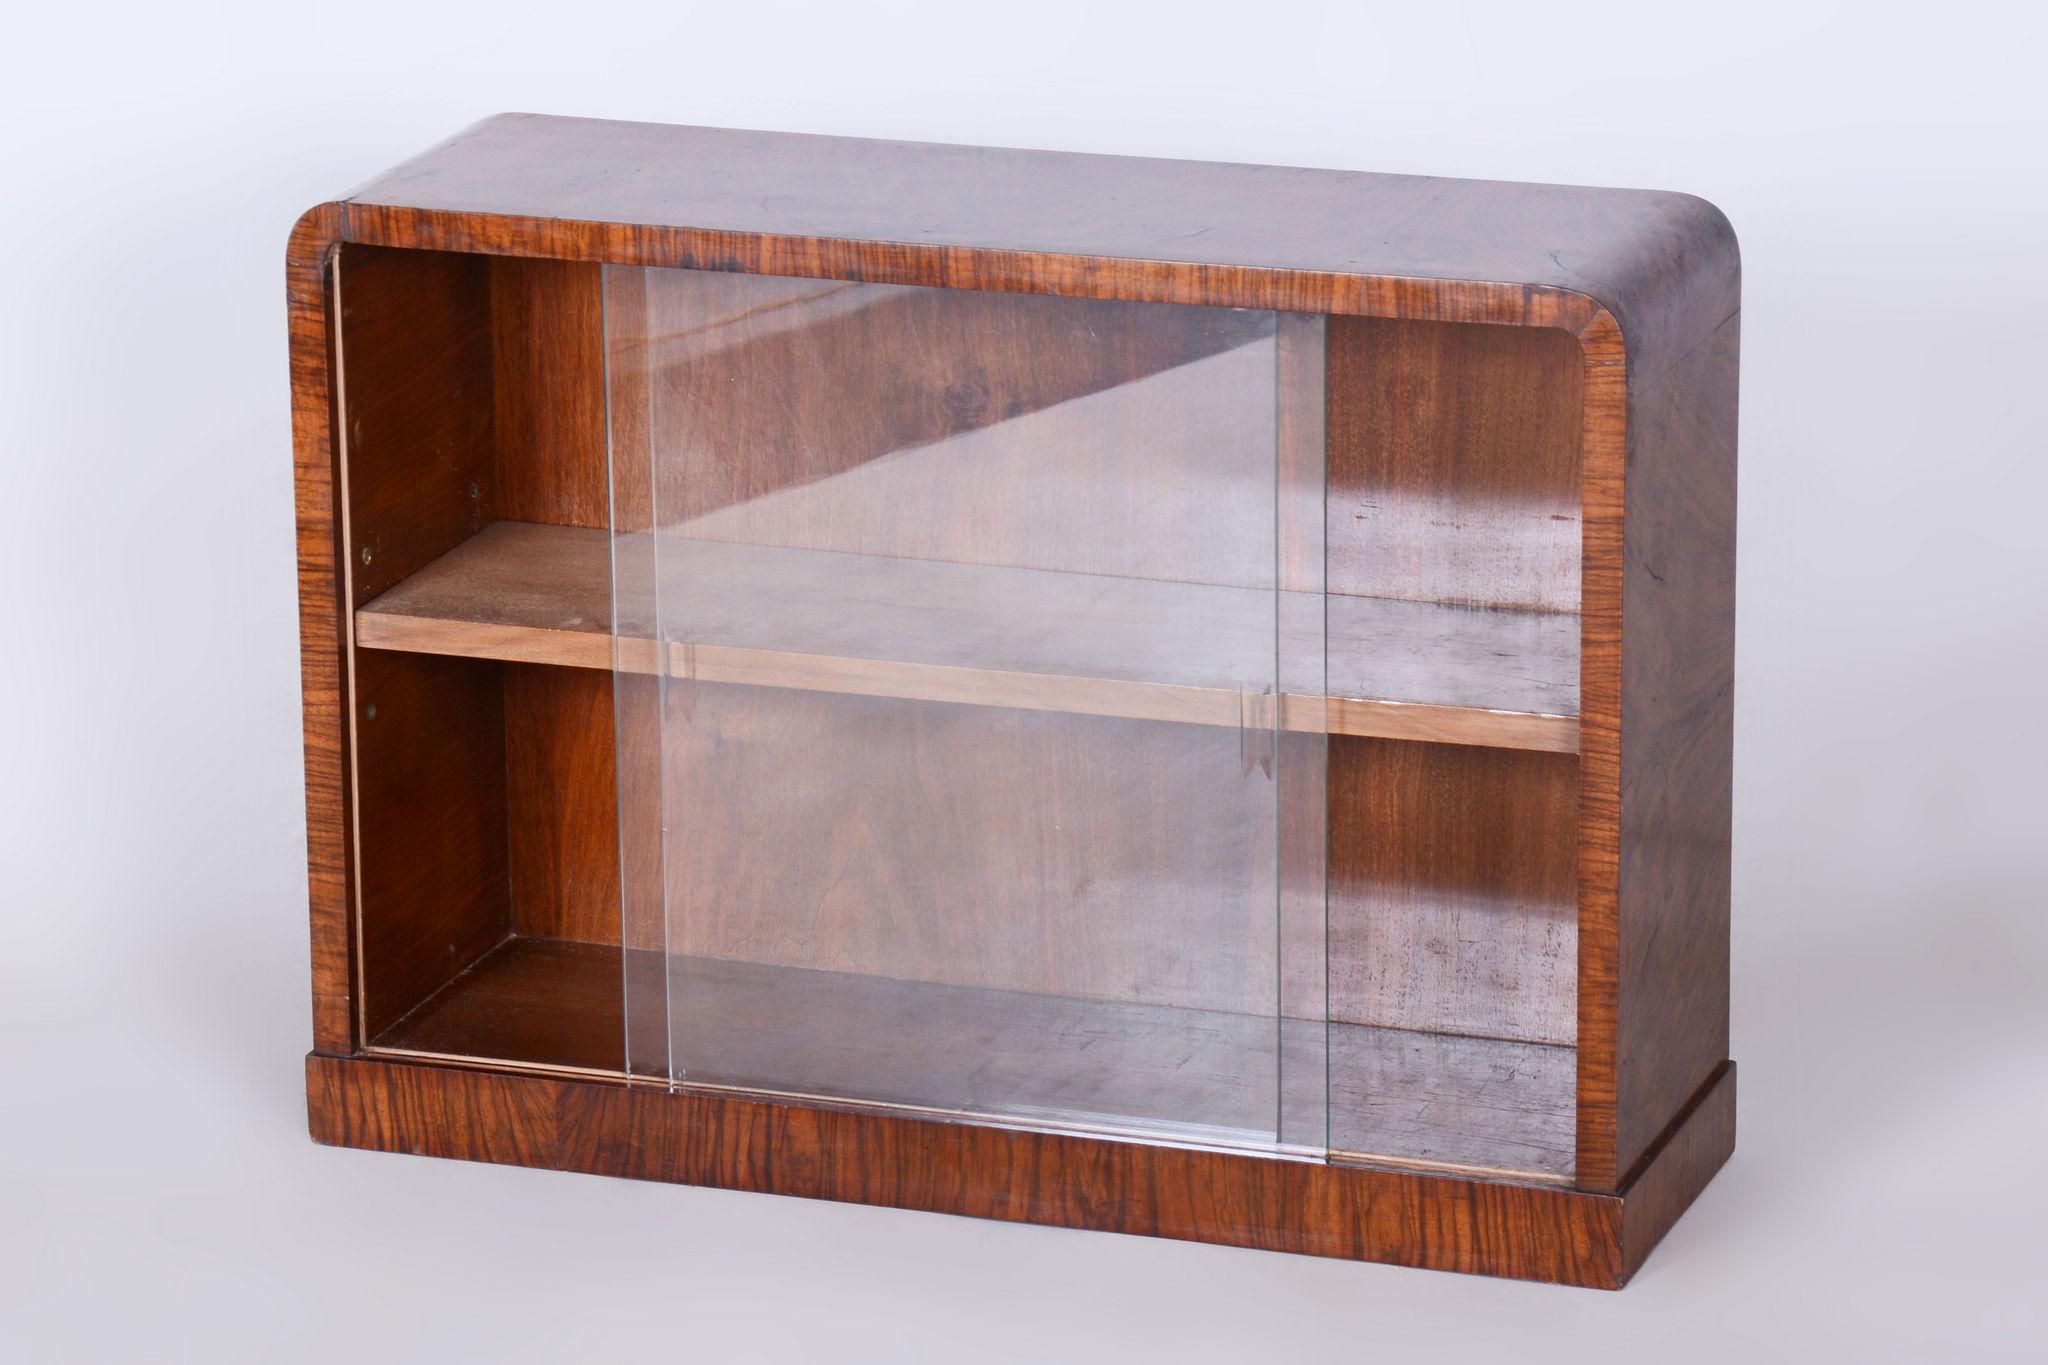 Mid-20th Century Small Restored Art Deco Display Bookcase, Walnut and Glass, Czech, 1930s For Sale